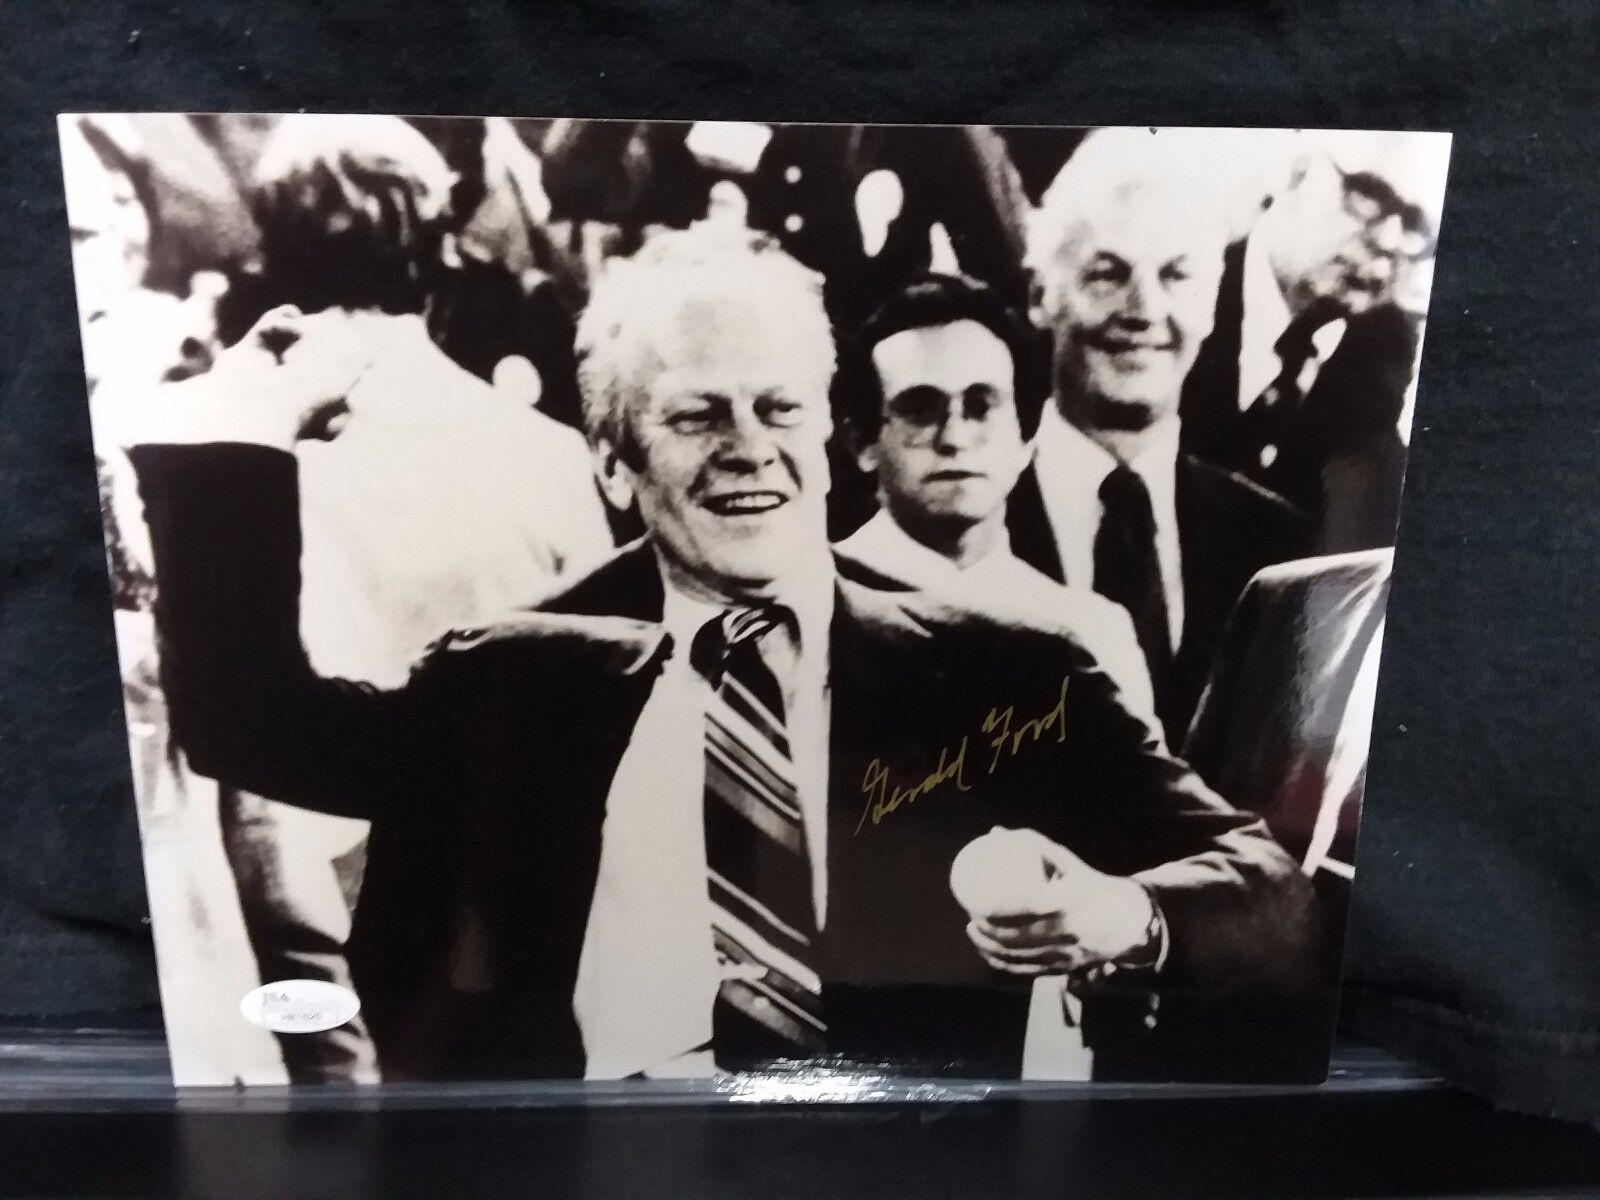 Gerald Ford President 'Throwing out 1st Pitch'  8x10 B&W Photo JSA  H81625